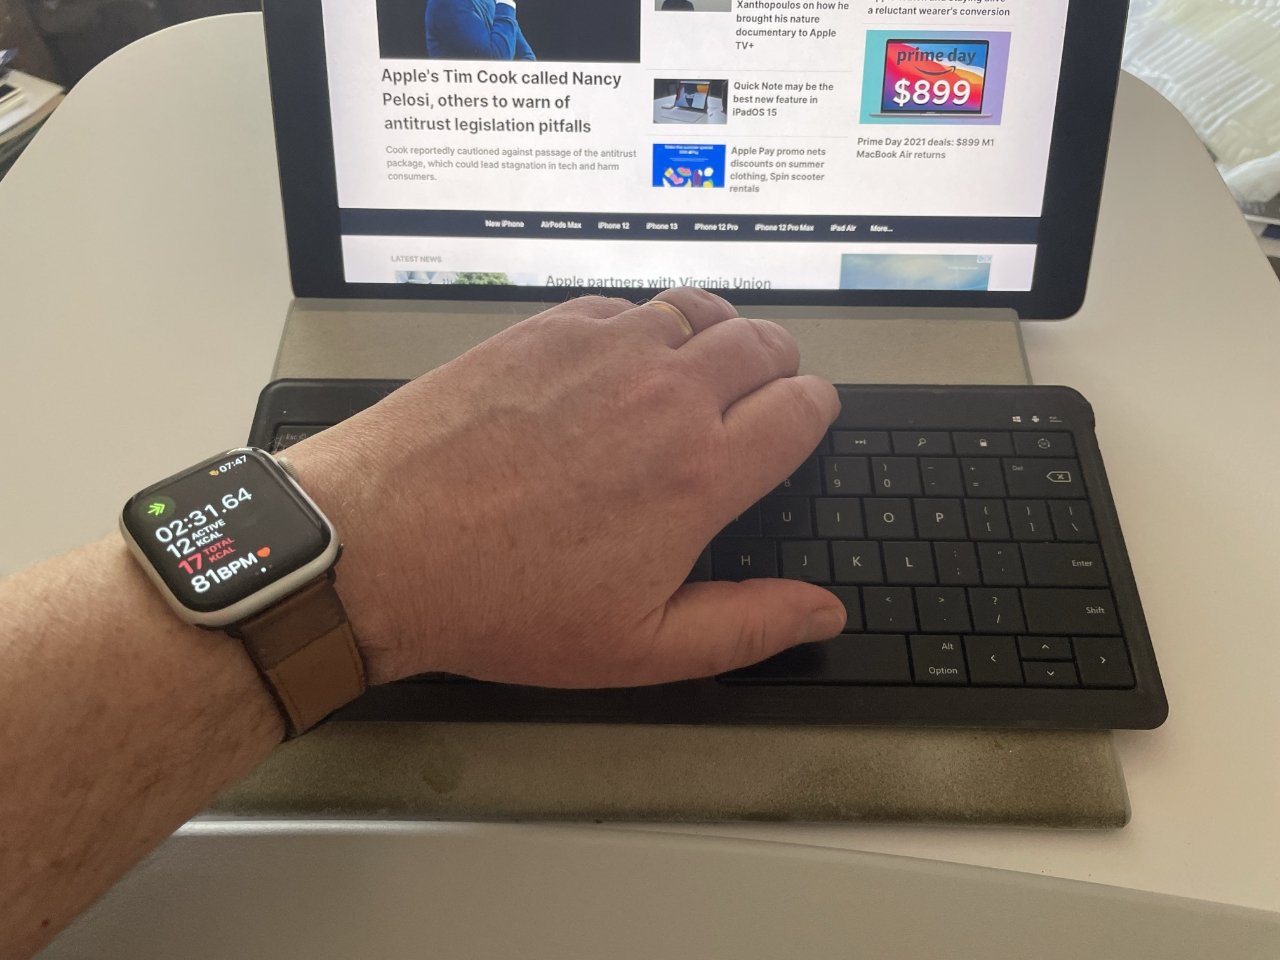 The optional extra desktop is small but big enough to work on. Notice the palm rest at the base of the desk, and my exhaustive exercise timing on the Apple Watch